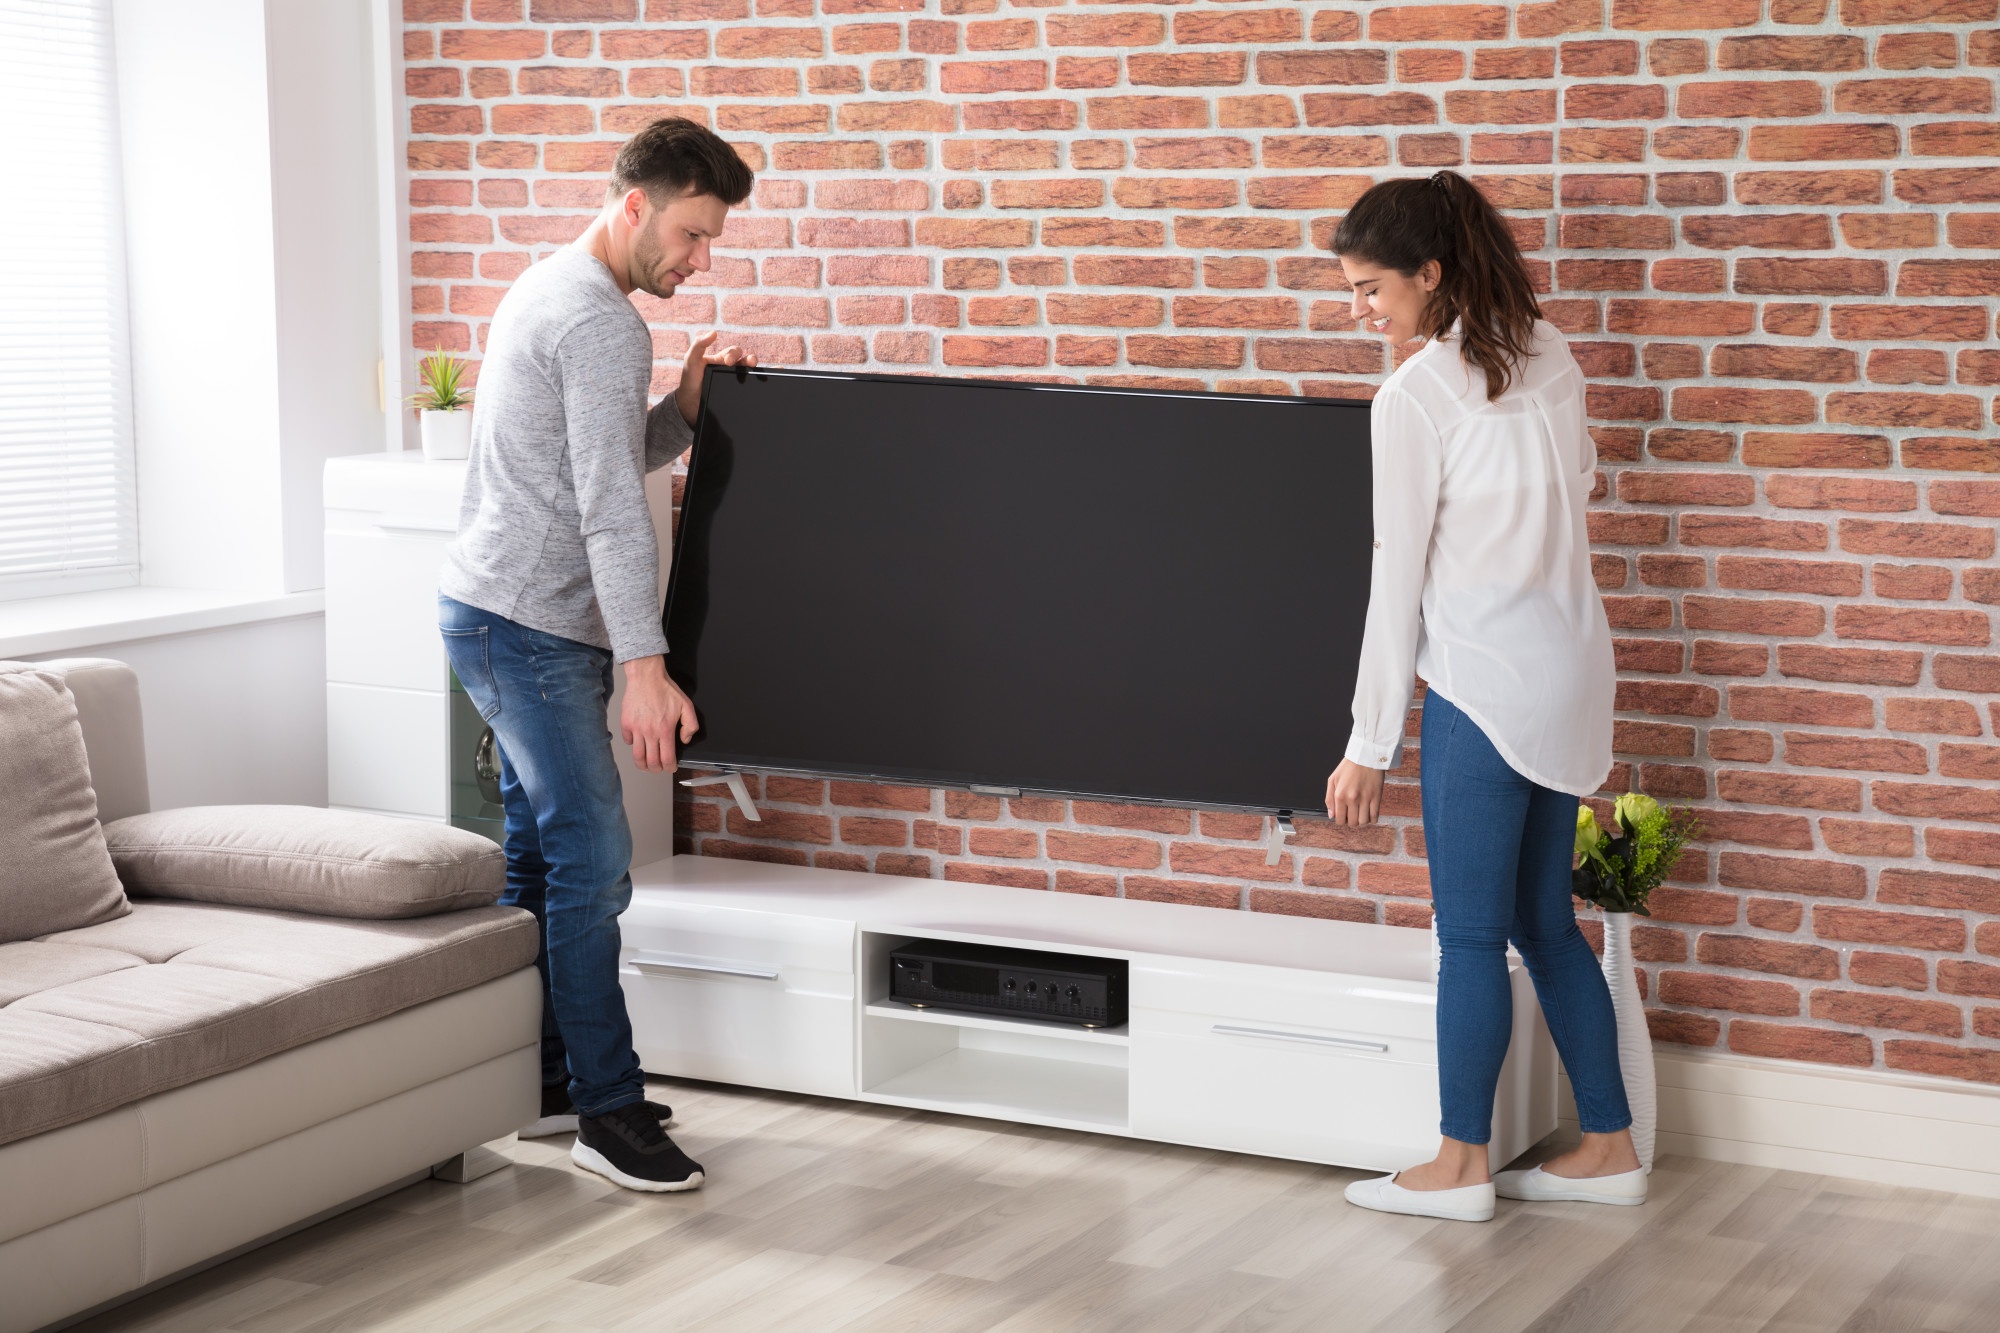 Great Savings Tips to Help You Find an Affordable 4k Television